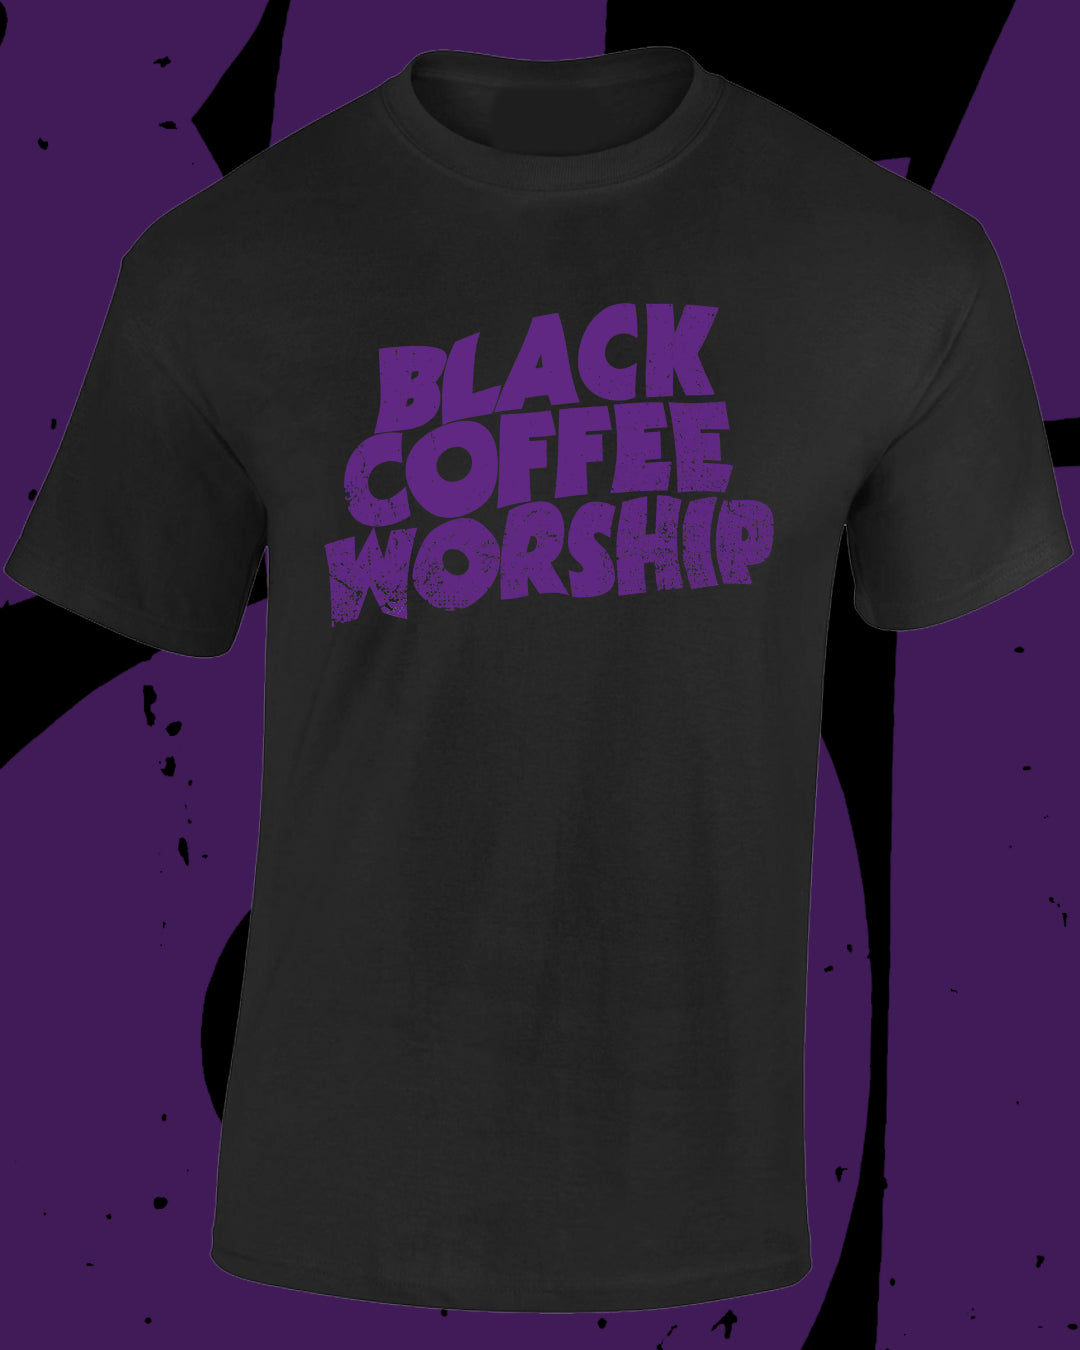 intro offer £6.66 masters of black coffee t shirt